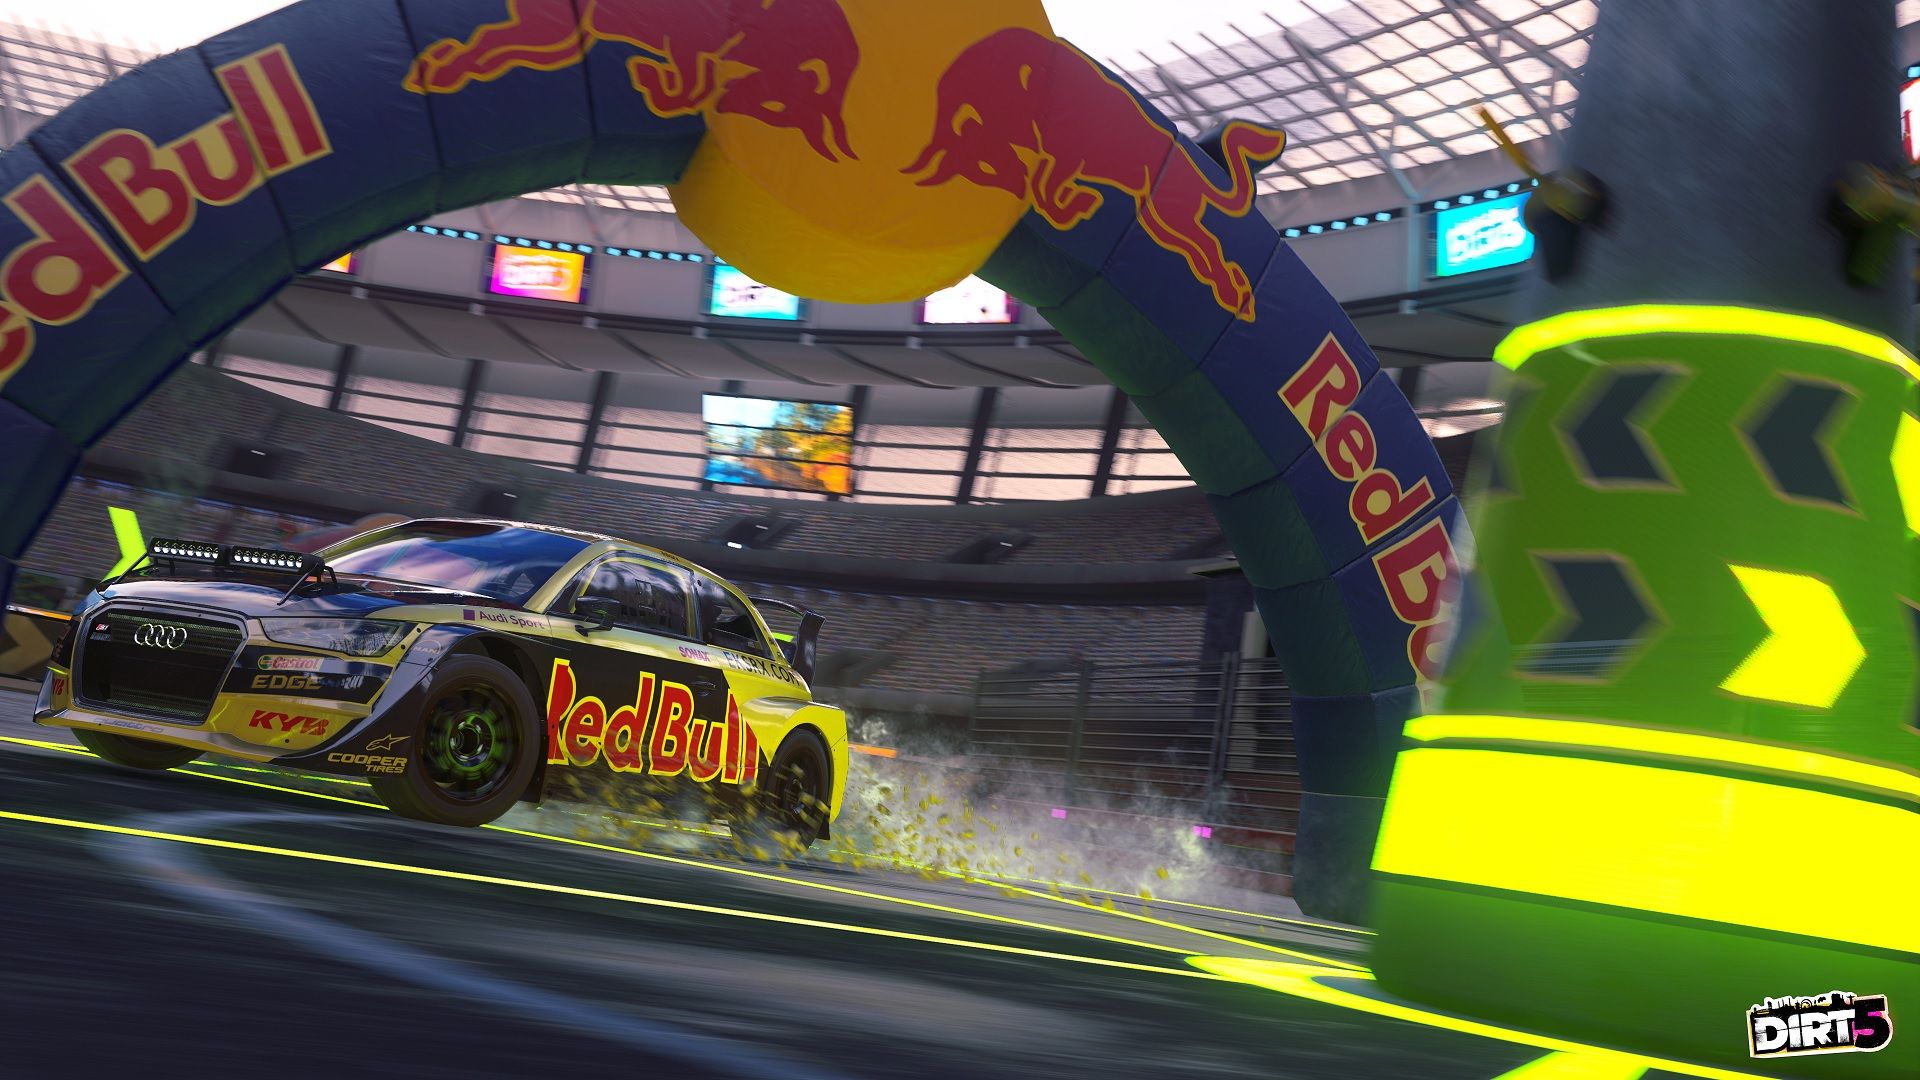 Best racing games on PC: Top games for high octane thrills